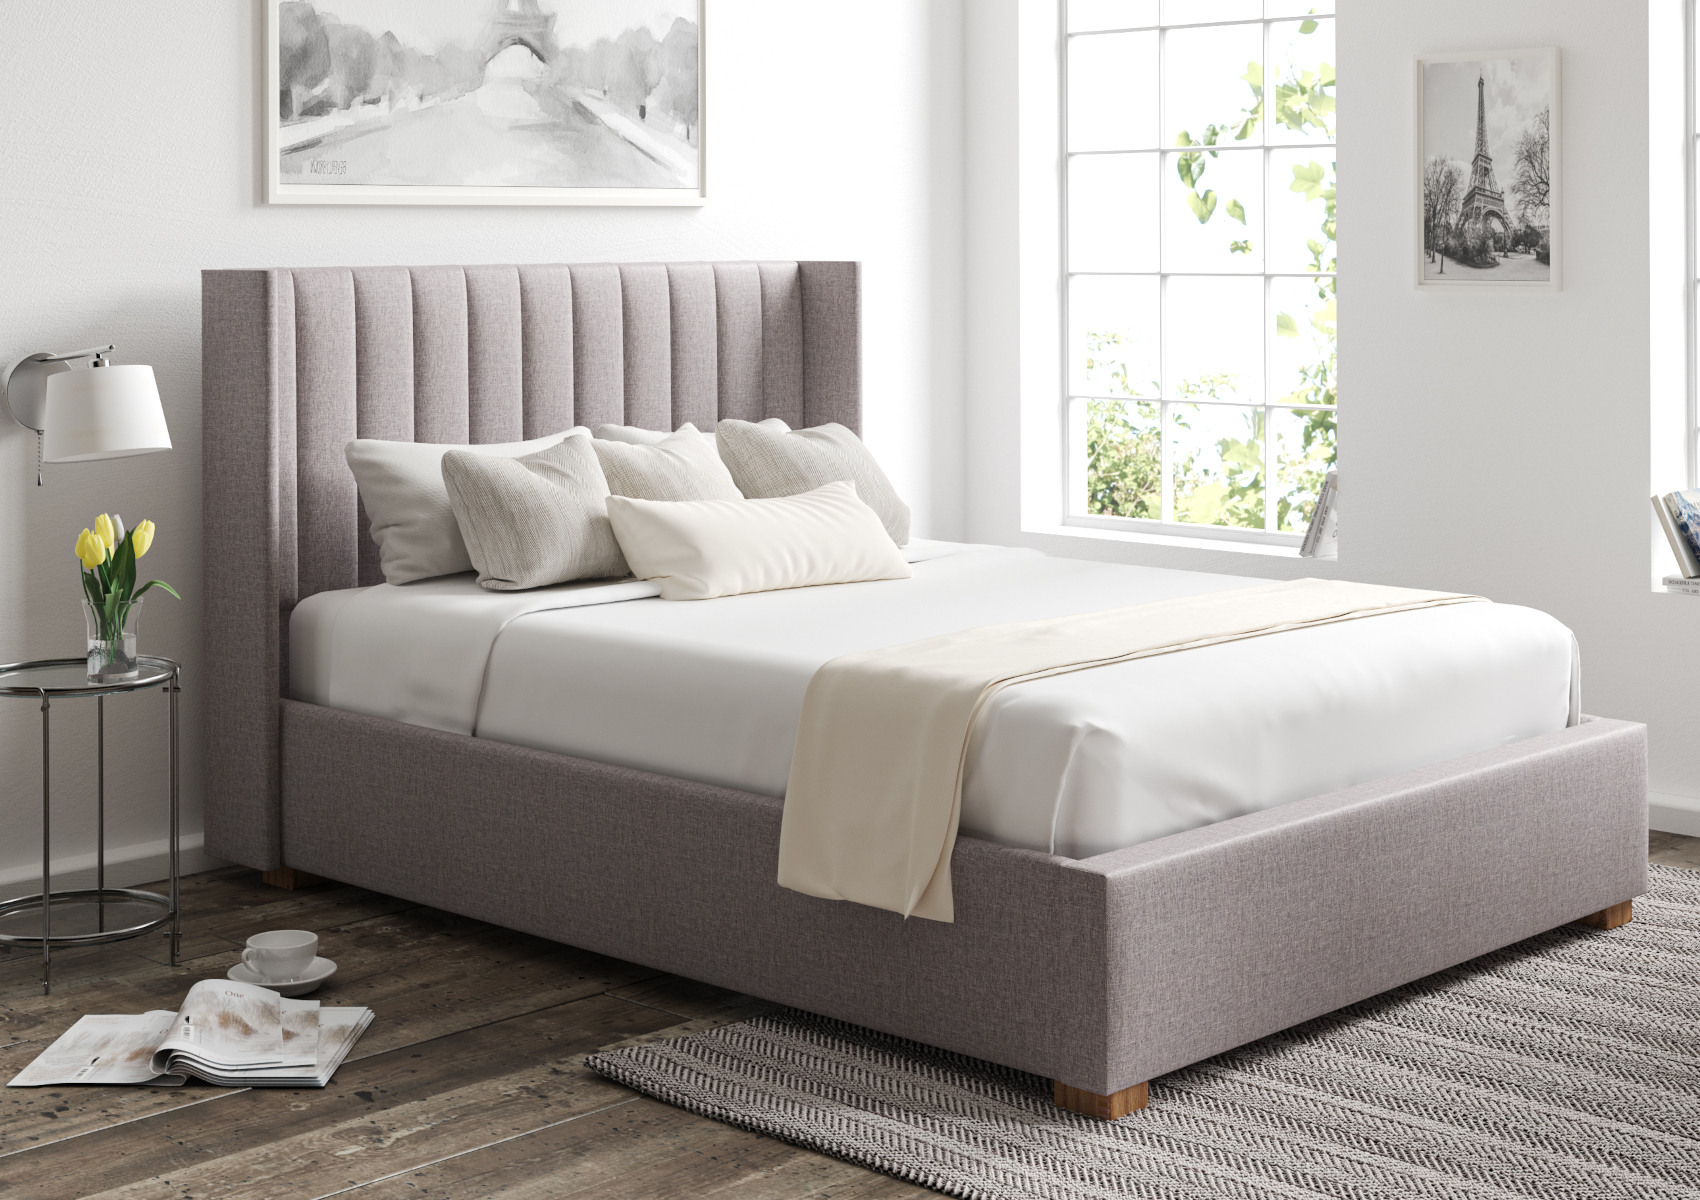 View Essentials Winged Grey Ottoman Bed Frame Time4Sleep information